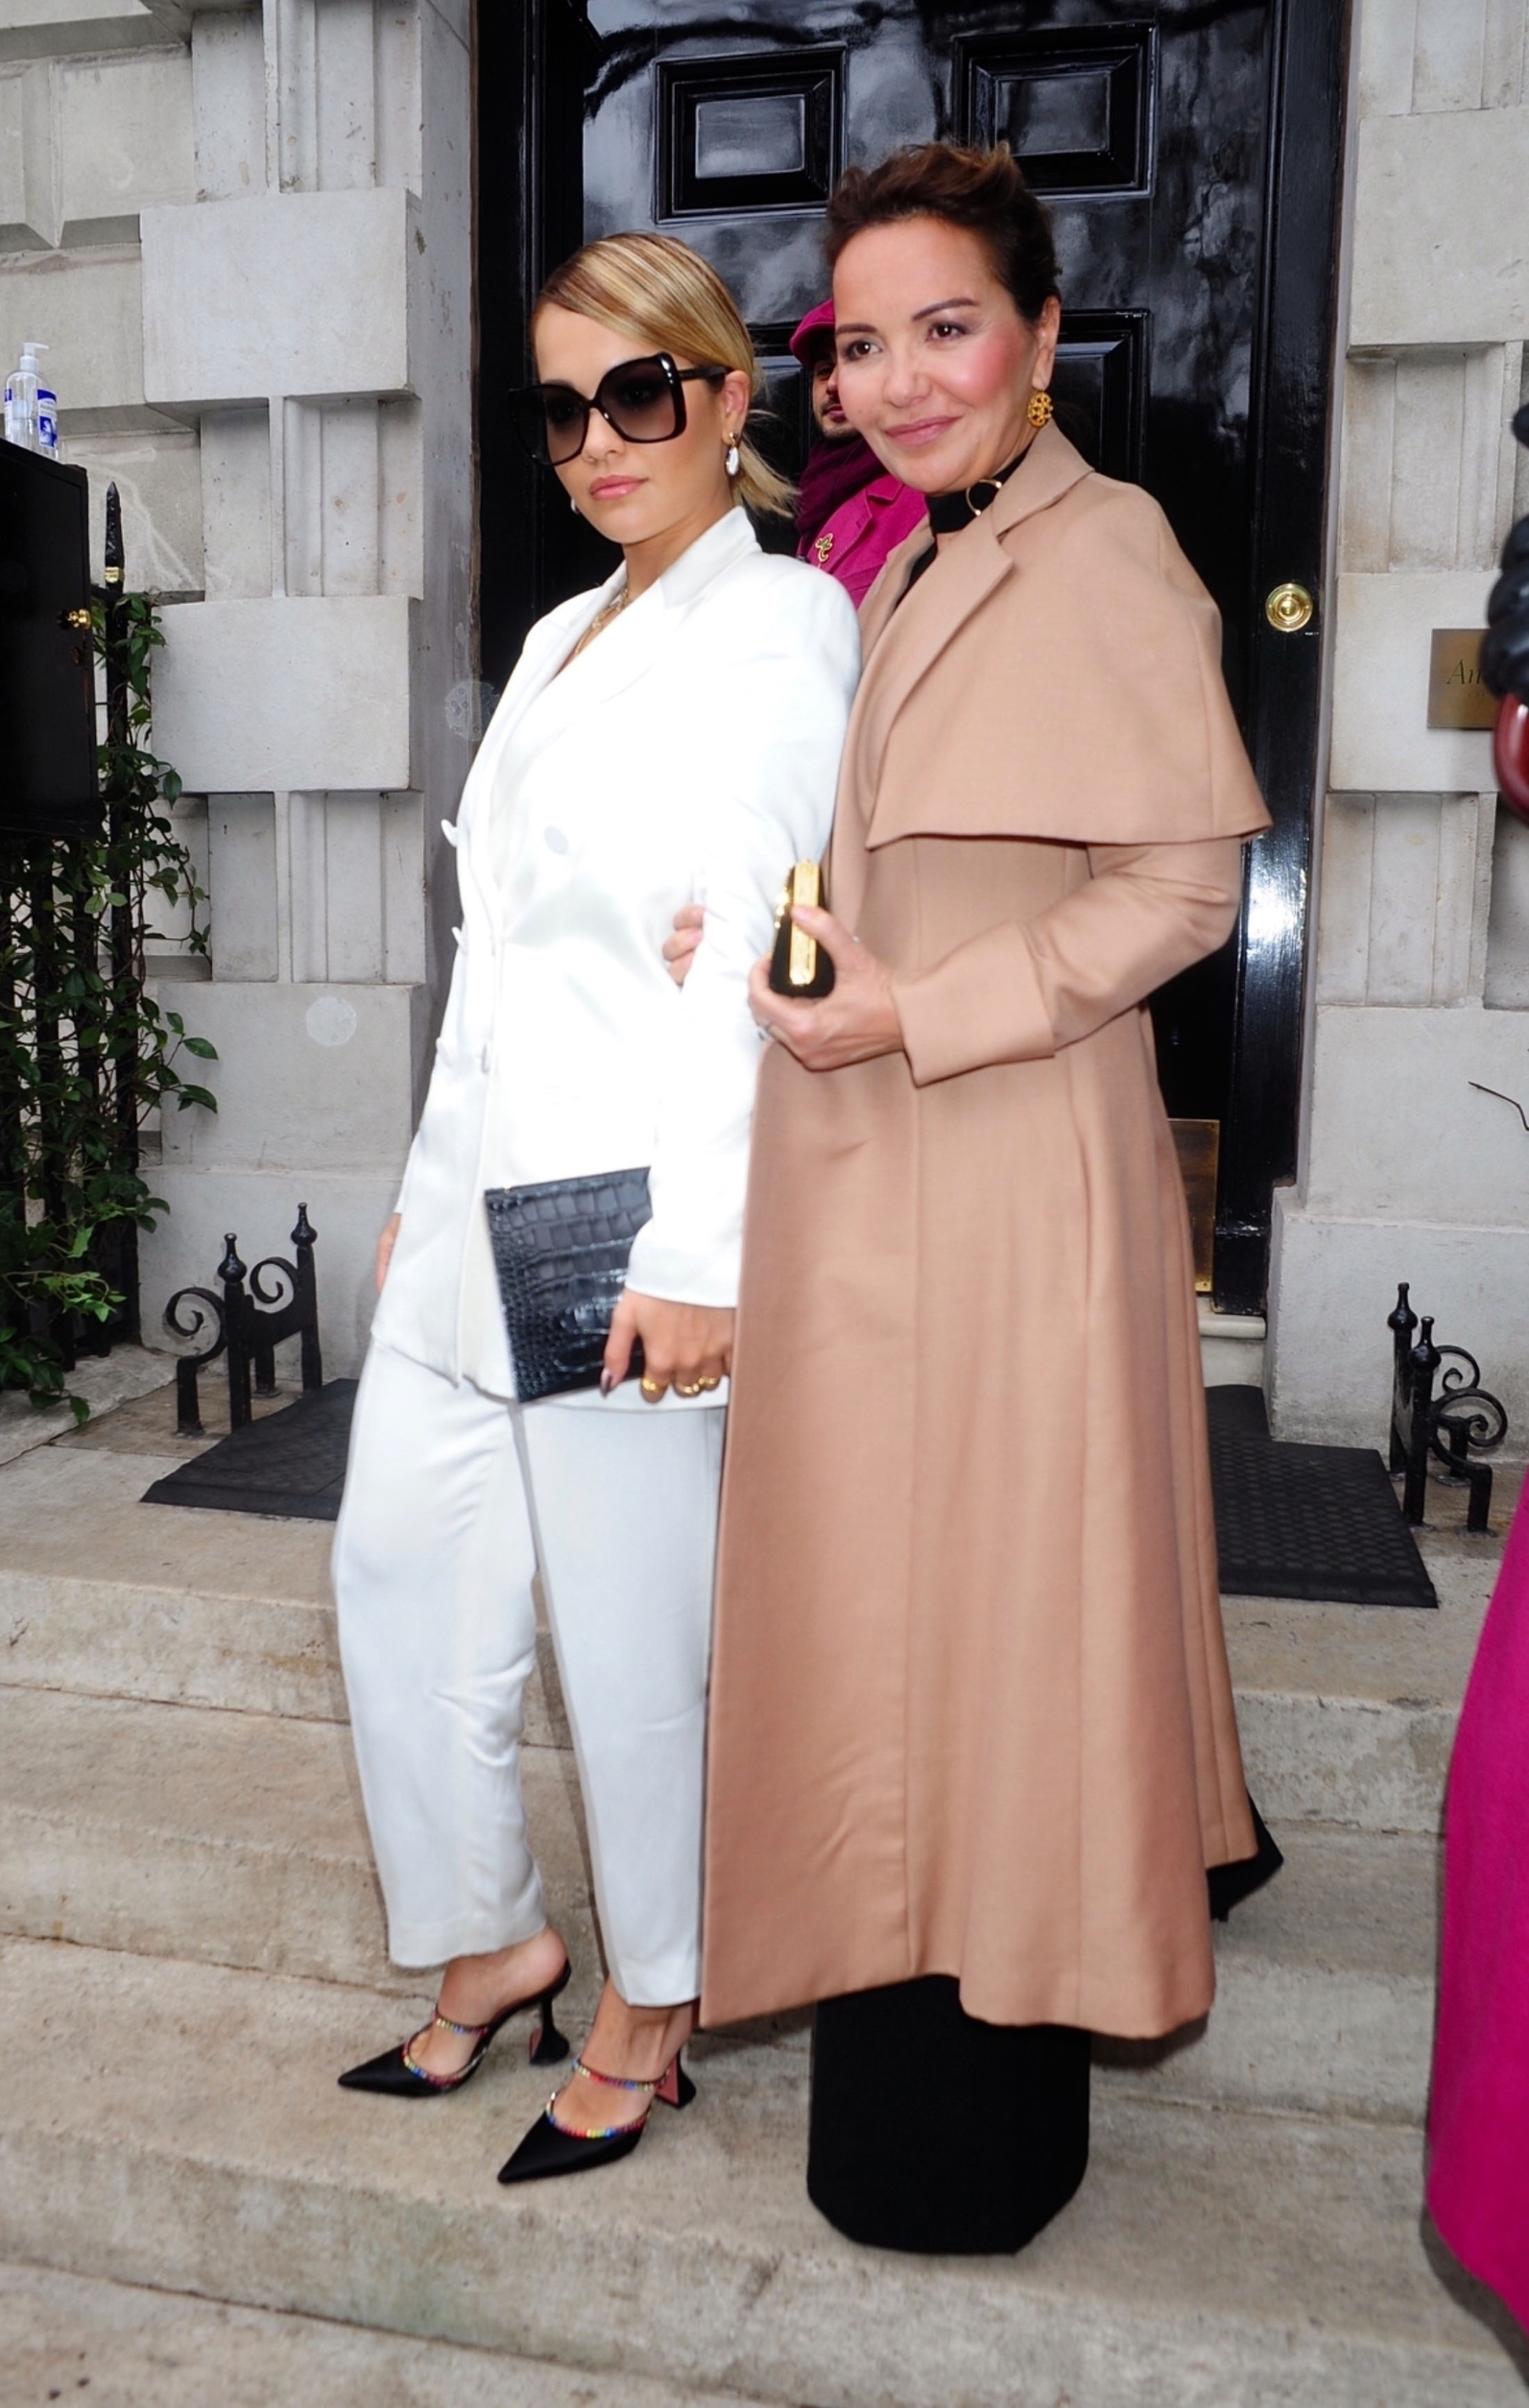 London, UNITED KINGDOM  - Singer-songwriter Rita Ora and mother Vera Sahatciu attend International Women's Day for The Caring Foundation at Annabel's in London, England.

BACKGRID UK 8 MARCH 2020,Image: 504690448, License: Rights-managed, Restrictions: , Model Release: no, Credit line: Focus / BACKGRID / Backgrid UK / Profimedia